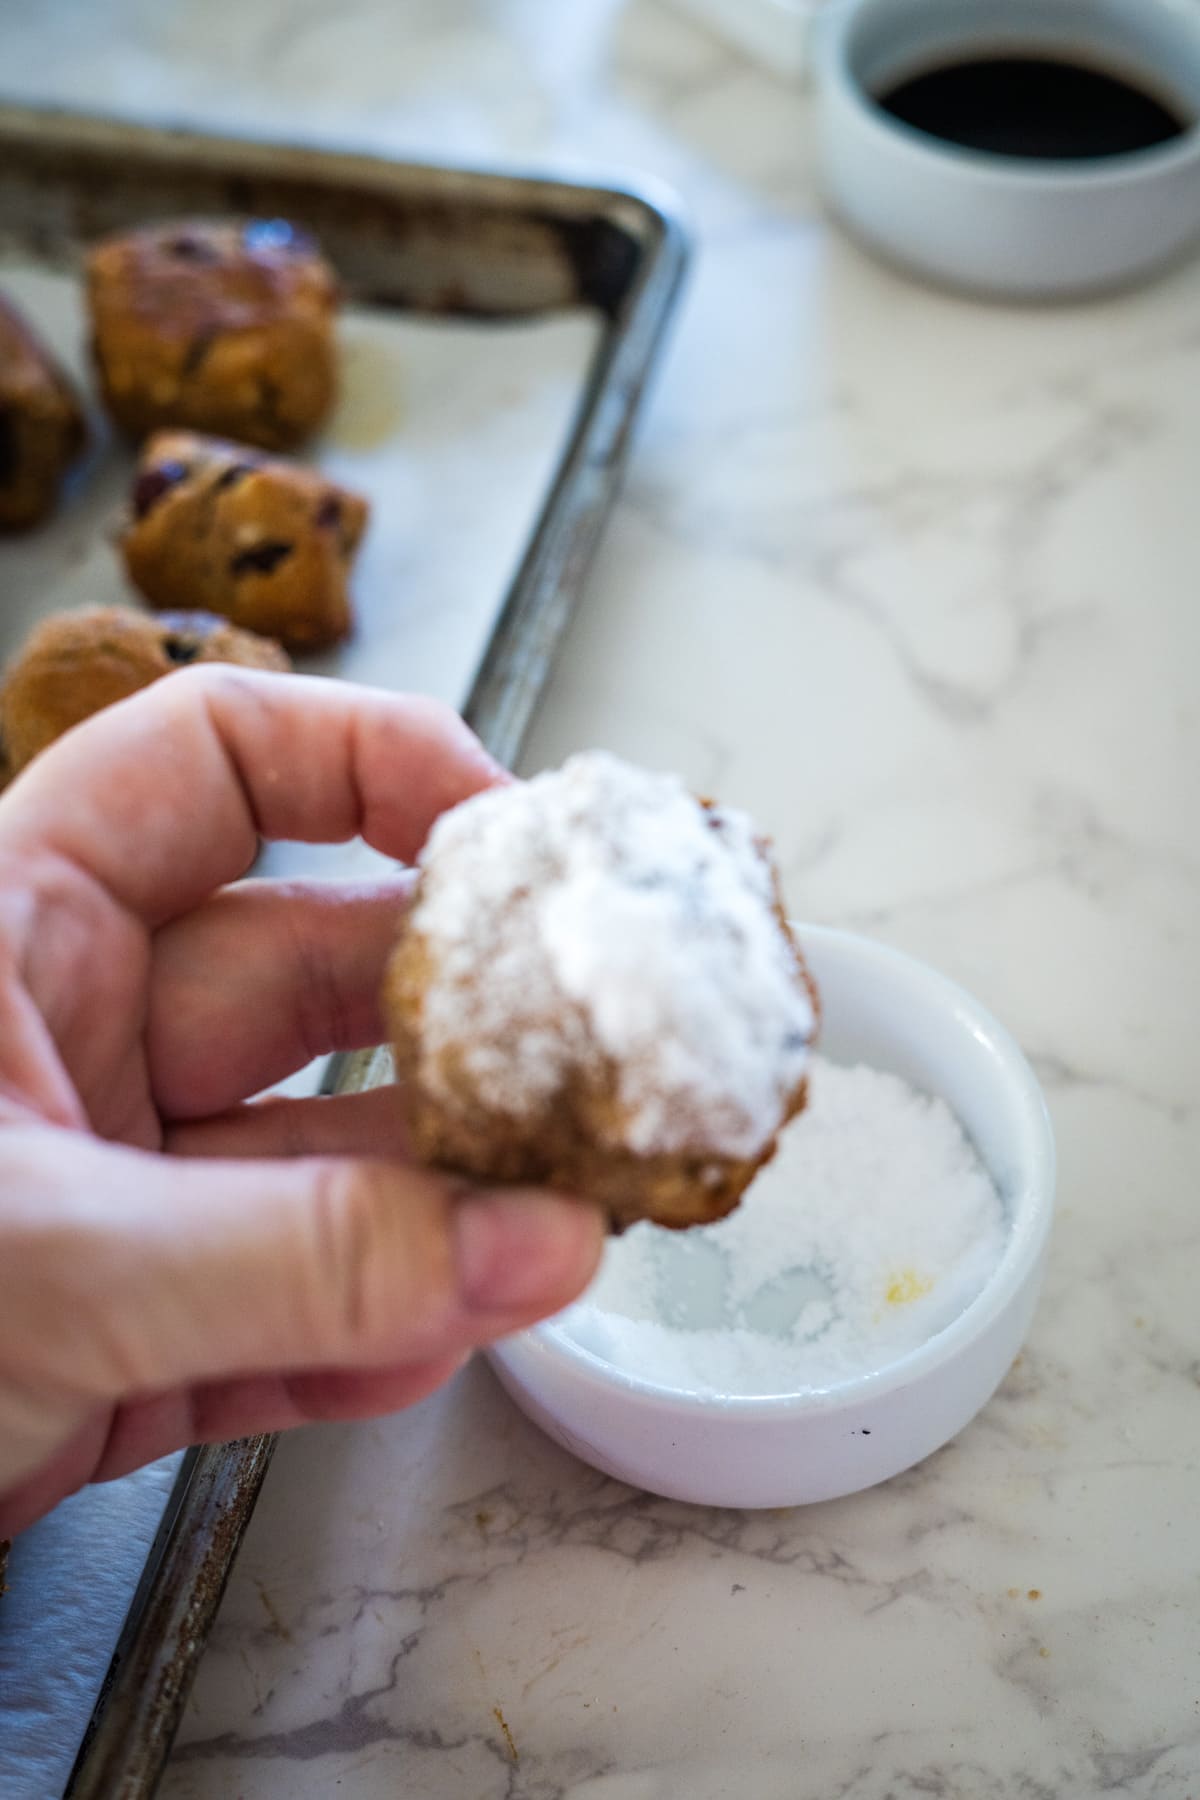 A hand holding a stollen bite with powdered sugar.